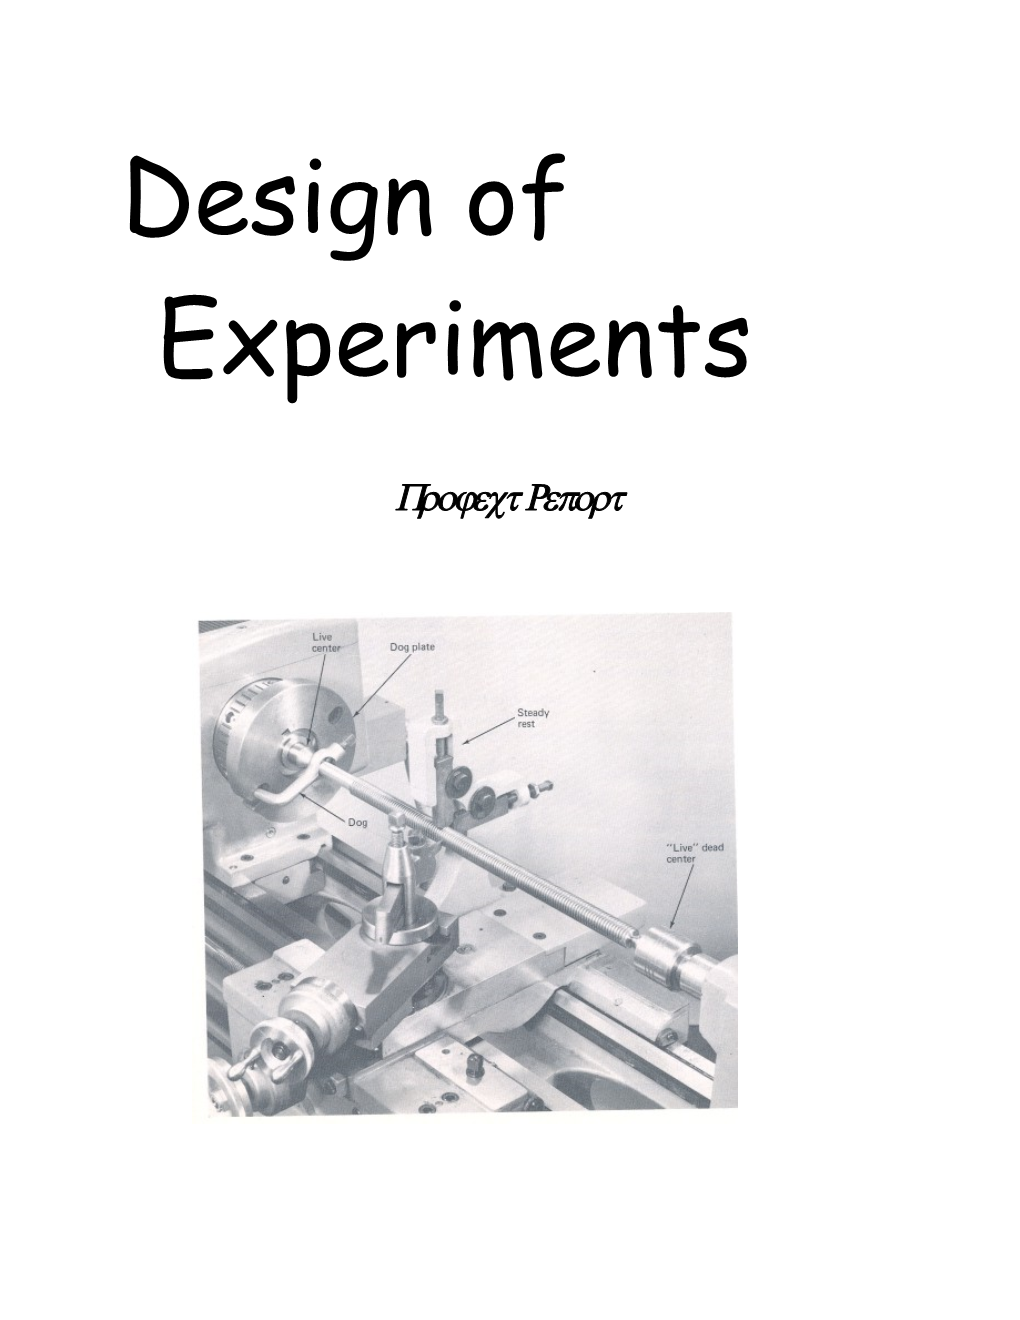 As a Part of Our Course Work for Design of Experiments , We Are Experimenting on External